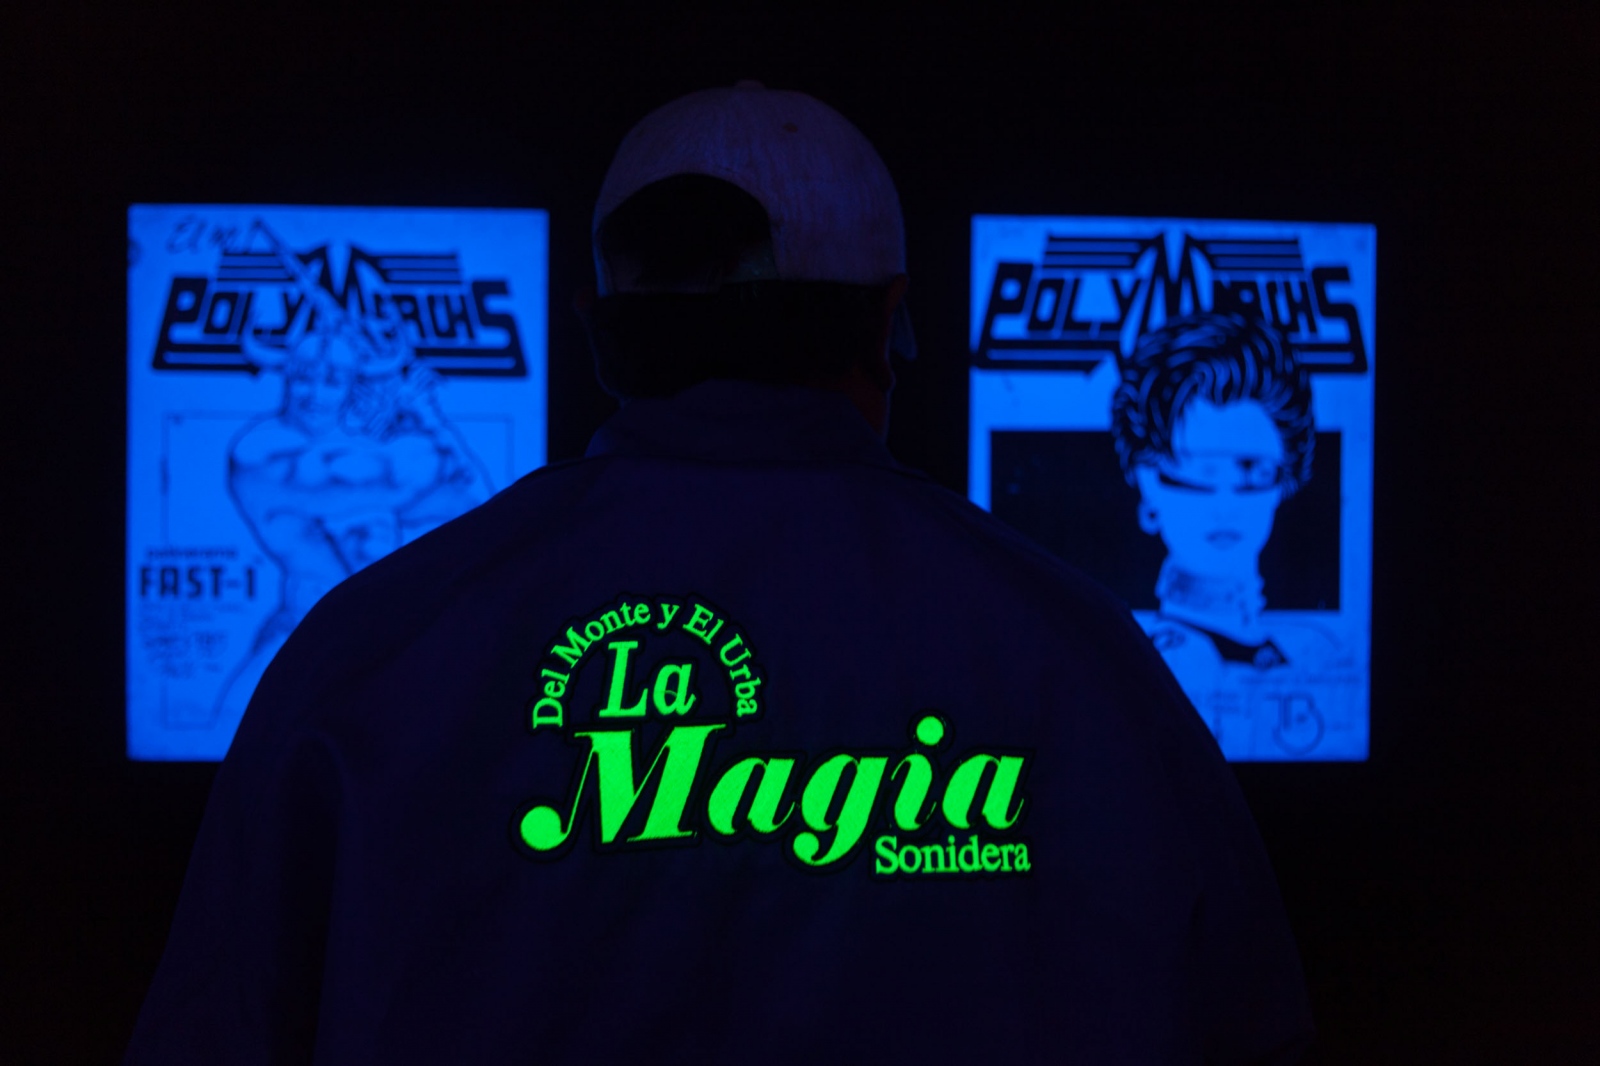  Â· La Magia soundsystem present in the exhibition in the opening of the exhibition â€œSonidero Graphicsâ€ &nbsp;in the Spanish Cultural Center, which exhibited the work of illustration artist Jaime Ruelas who was responsible for most of the futuristic posters of Sonido Polymarchs in the 80s. &nbsp;// &nbsp;Â· Sonido La Magia presente en la exposicion de "Grafica Sonidera" en el Centro Cultural de EspaÃ±a en donde se presentaron dibujos de Jaime Ruelas de la Ã©poca de los 80s con su estilo futurista.&nbsp; 